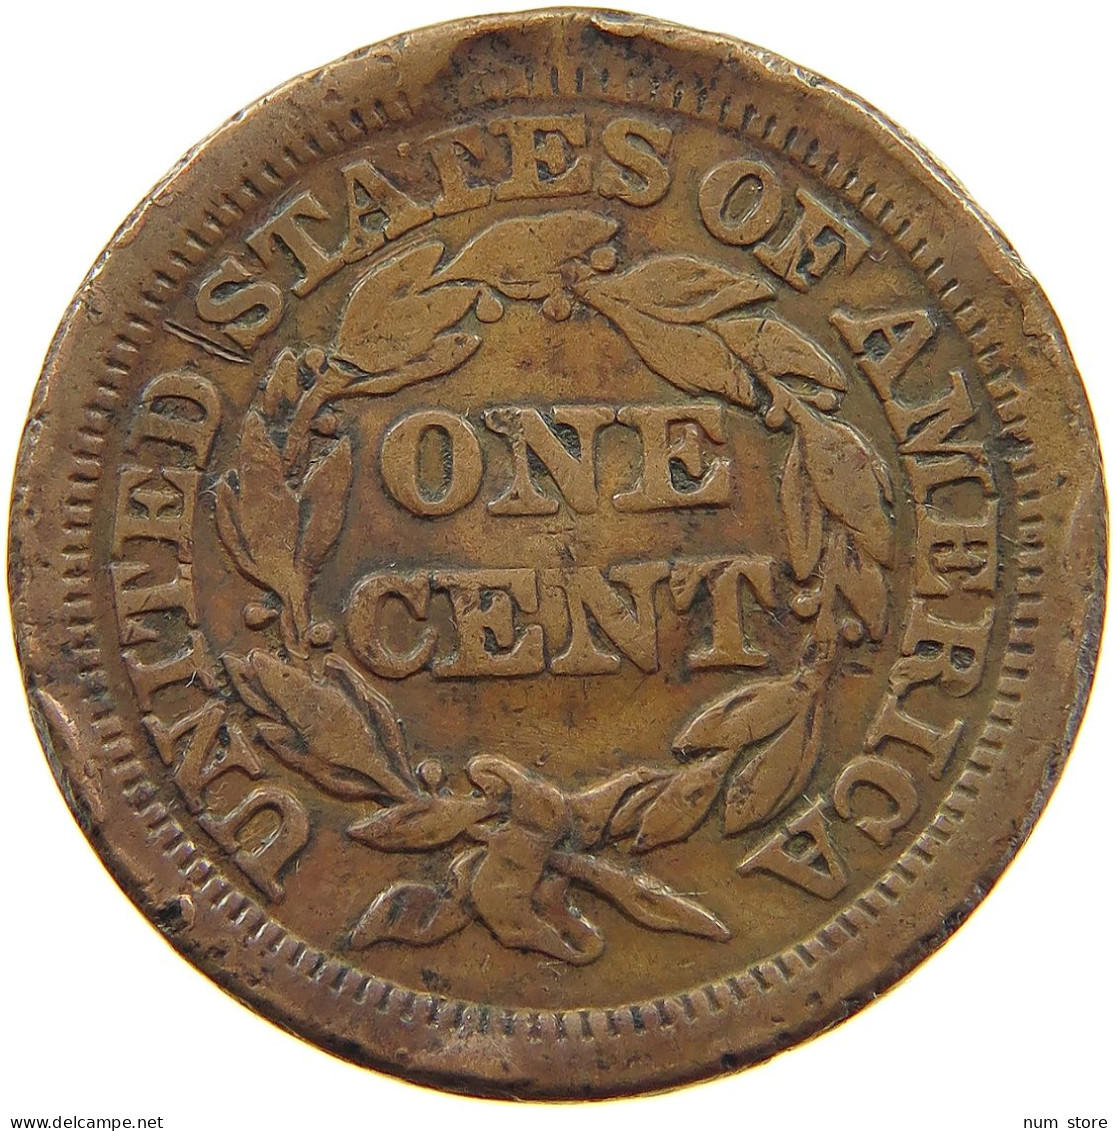 UNITED STATES OF AMERICA LARGE CENT 1853 Braided Hair #a007 0339 - 1840-1857: Braided Hair